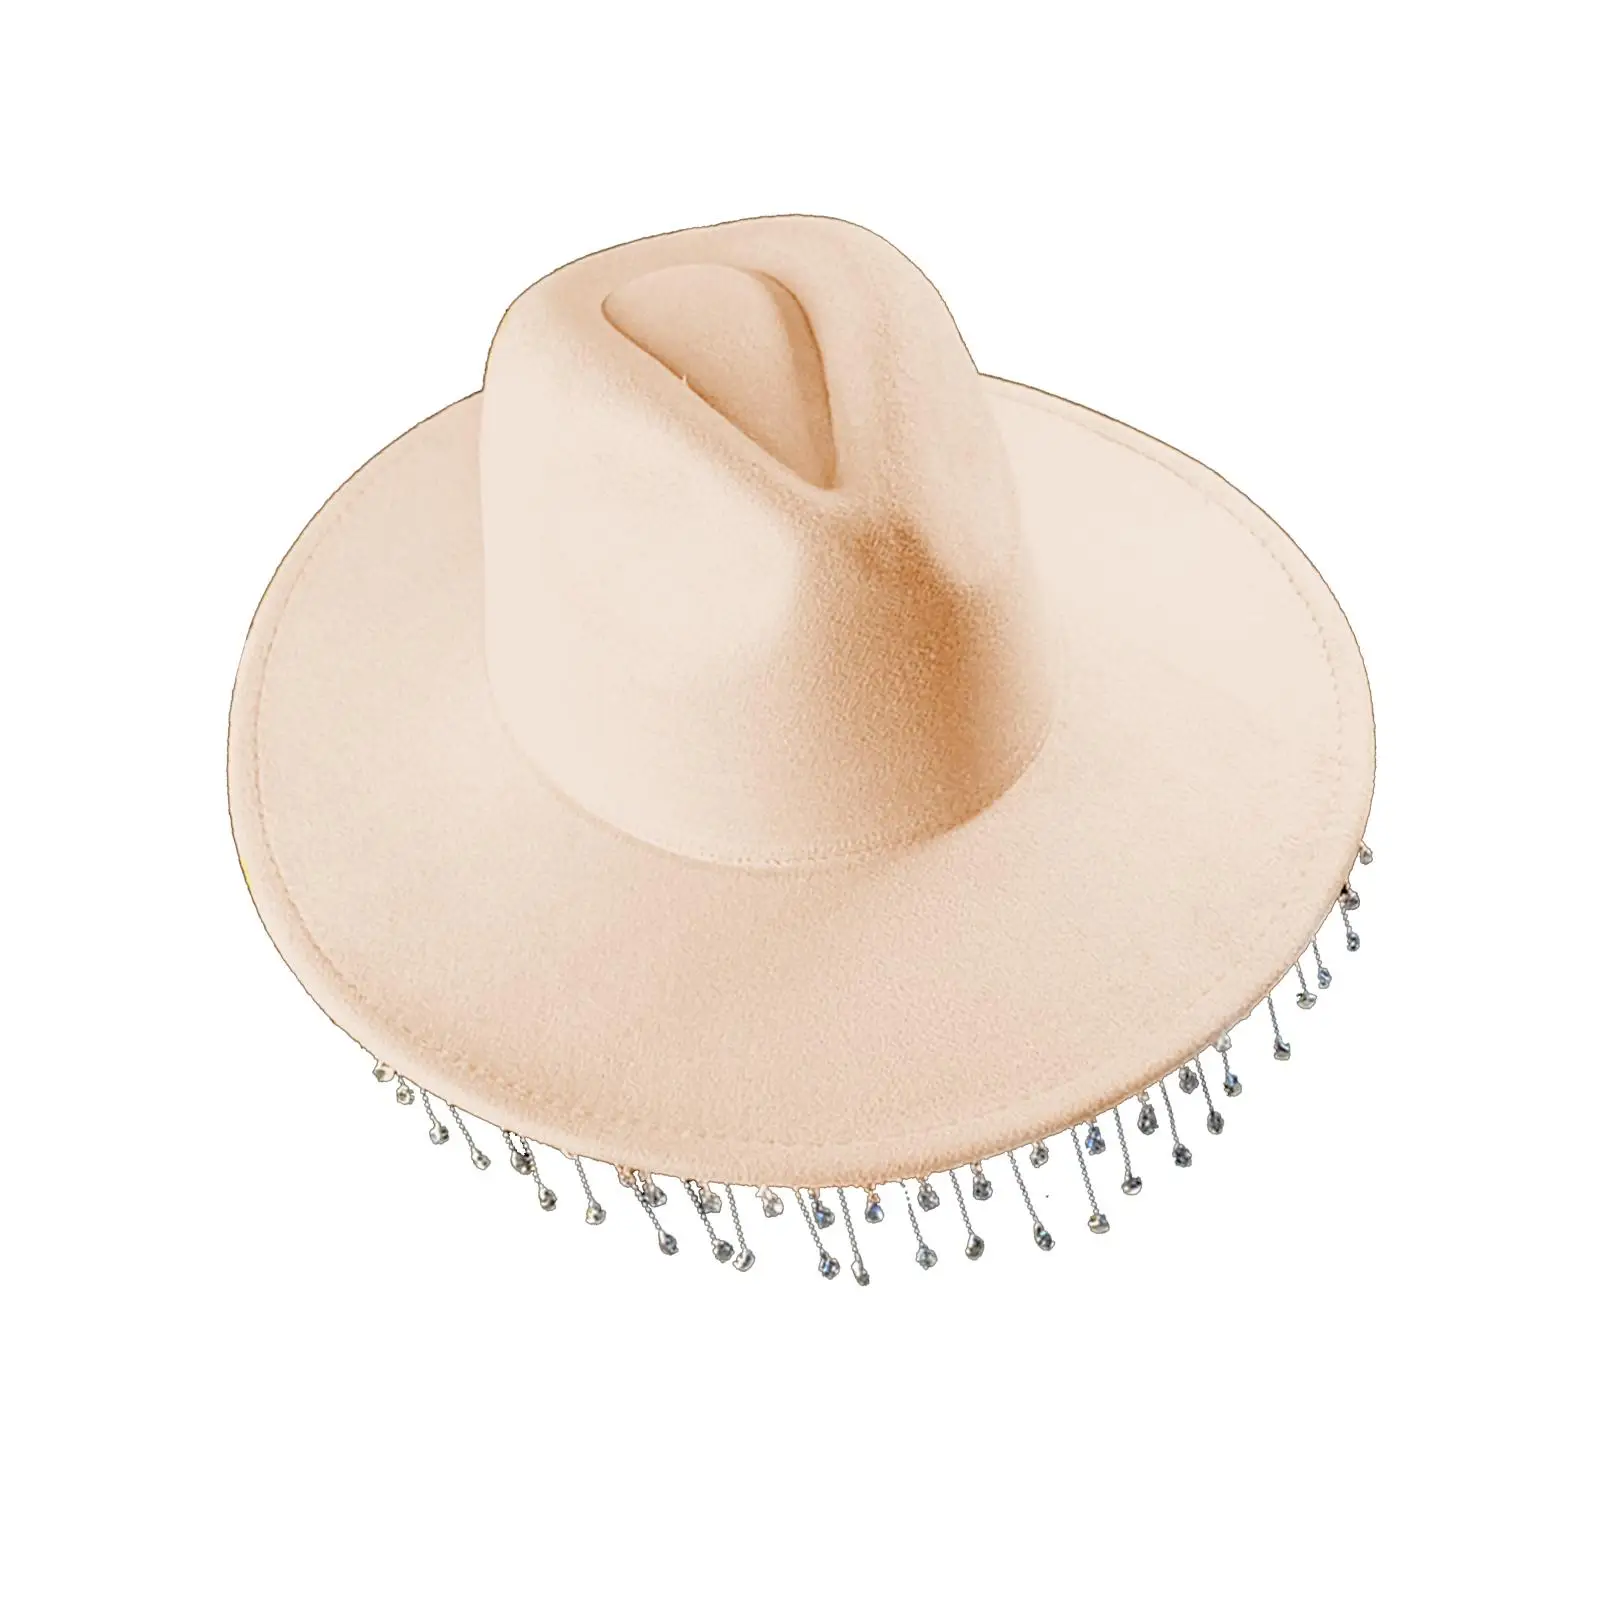 Cowboy Hat Cowgirl Hats Fedora Hat for Music Festival Concerts  